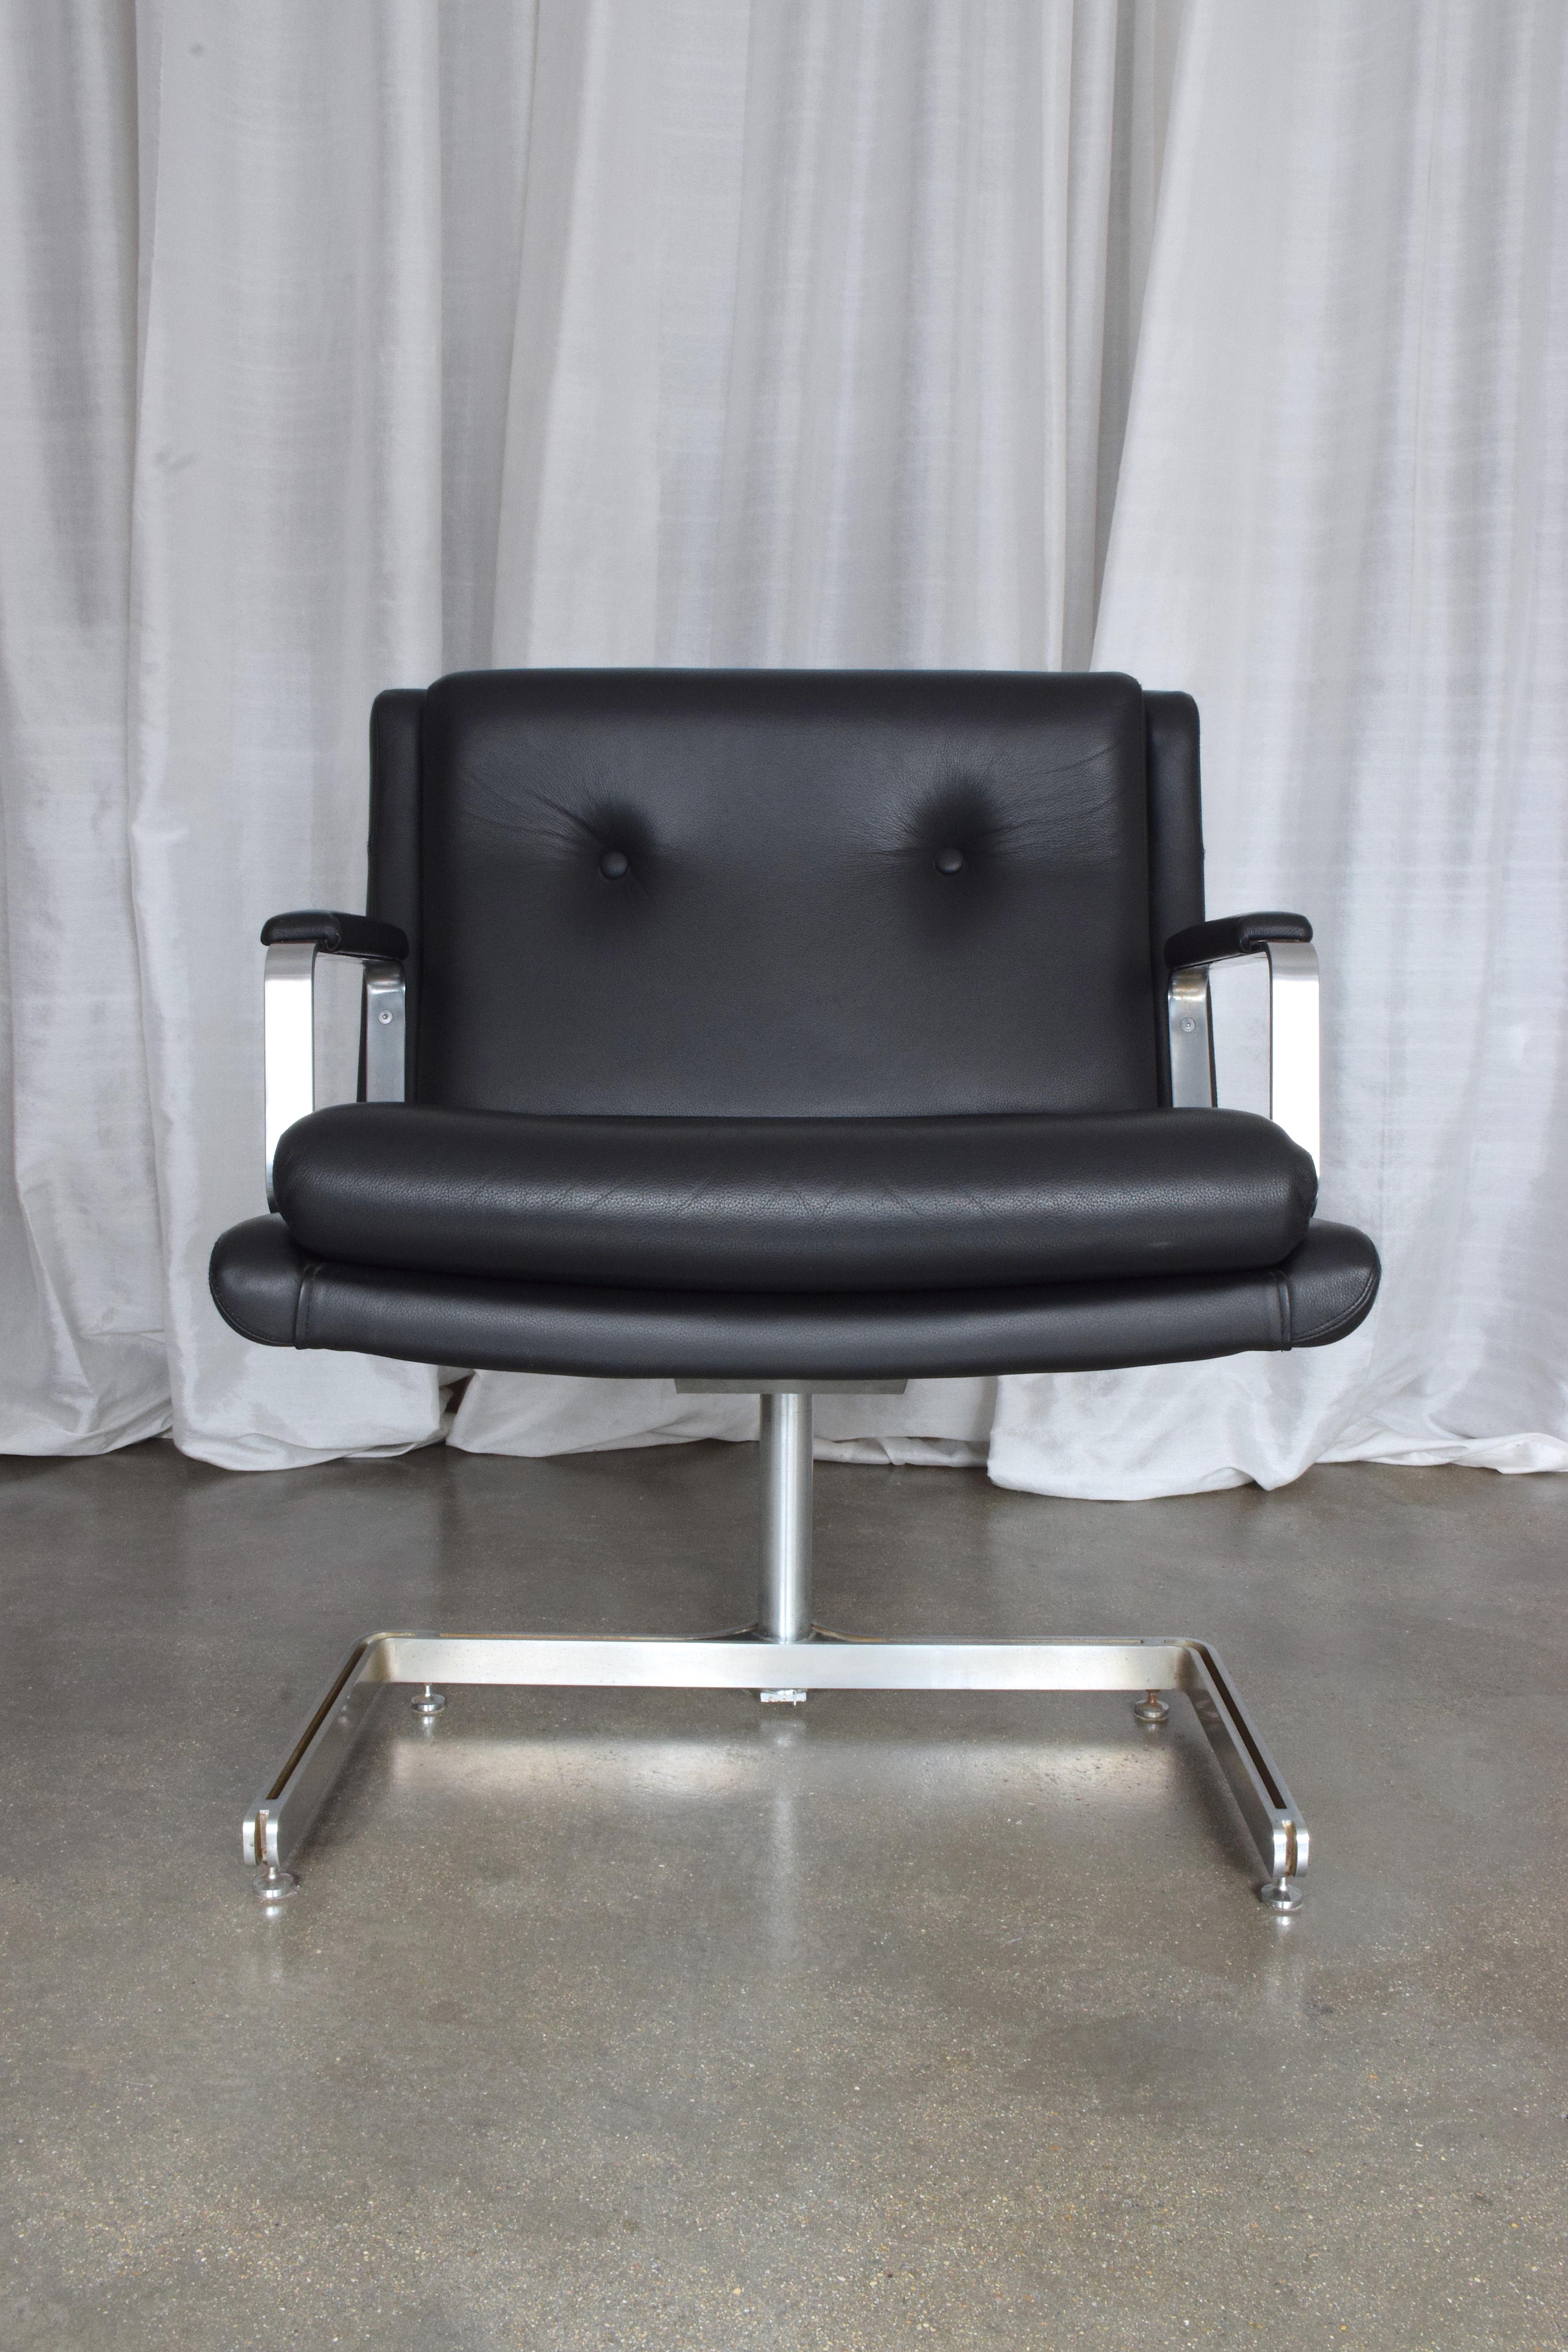 A set of two highly collectible vintage lounge or office chairs by iconic French designer Raphael Raffel designed in stainless steel and black leather with its distinctive tripod shaped structure. 
We have included two images of the book in which